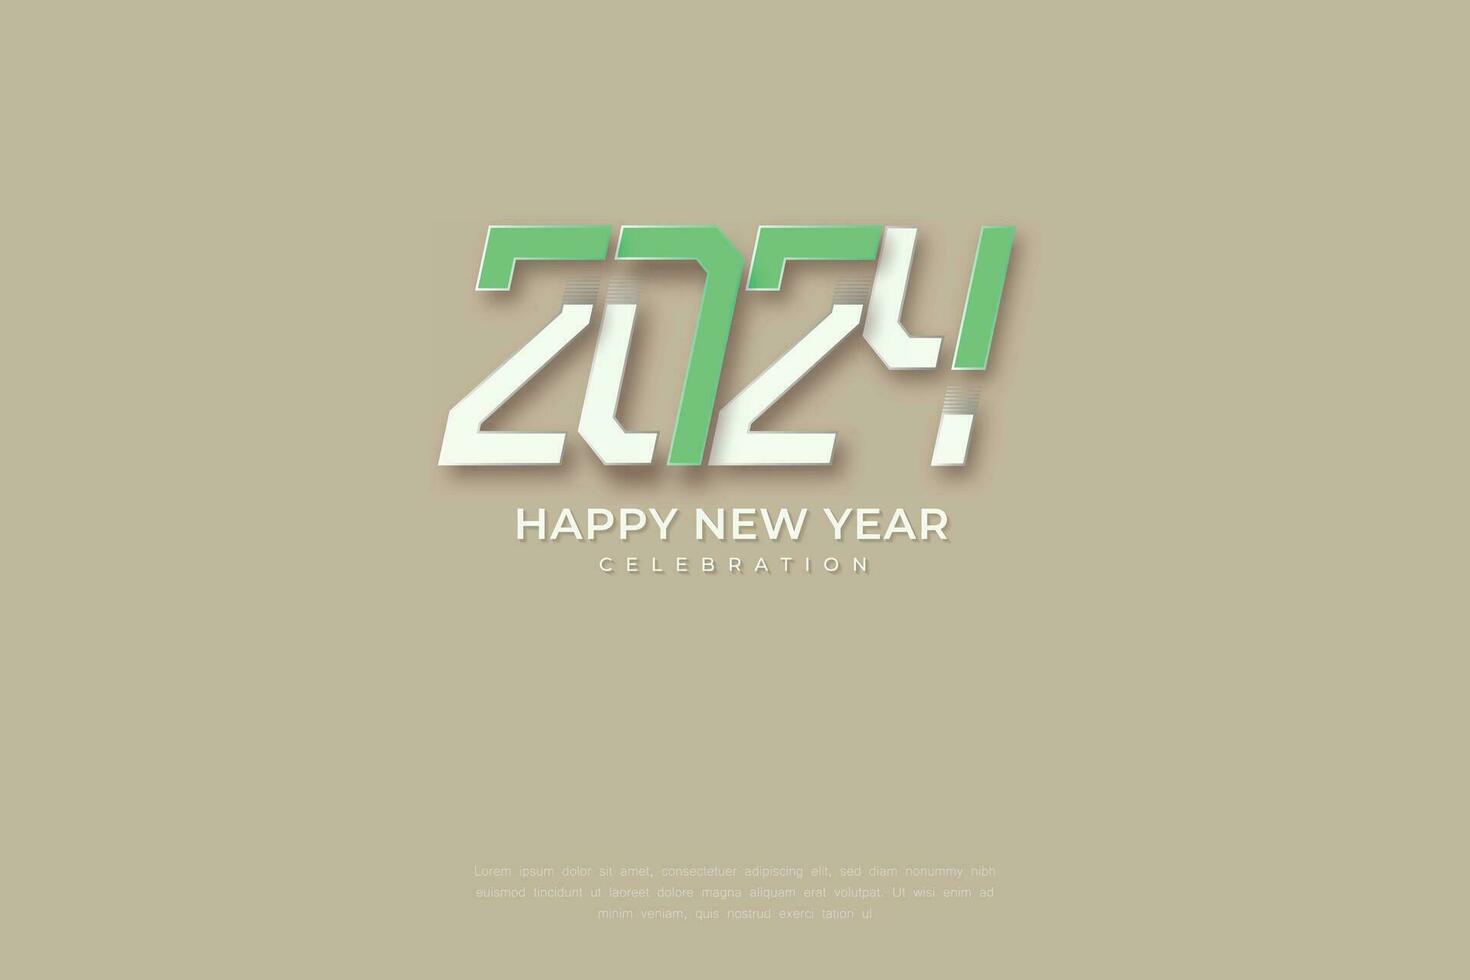 Simple and Clean Design Happy New Year 2024 for Background for Banners, Posters or Calendar. vector